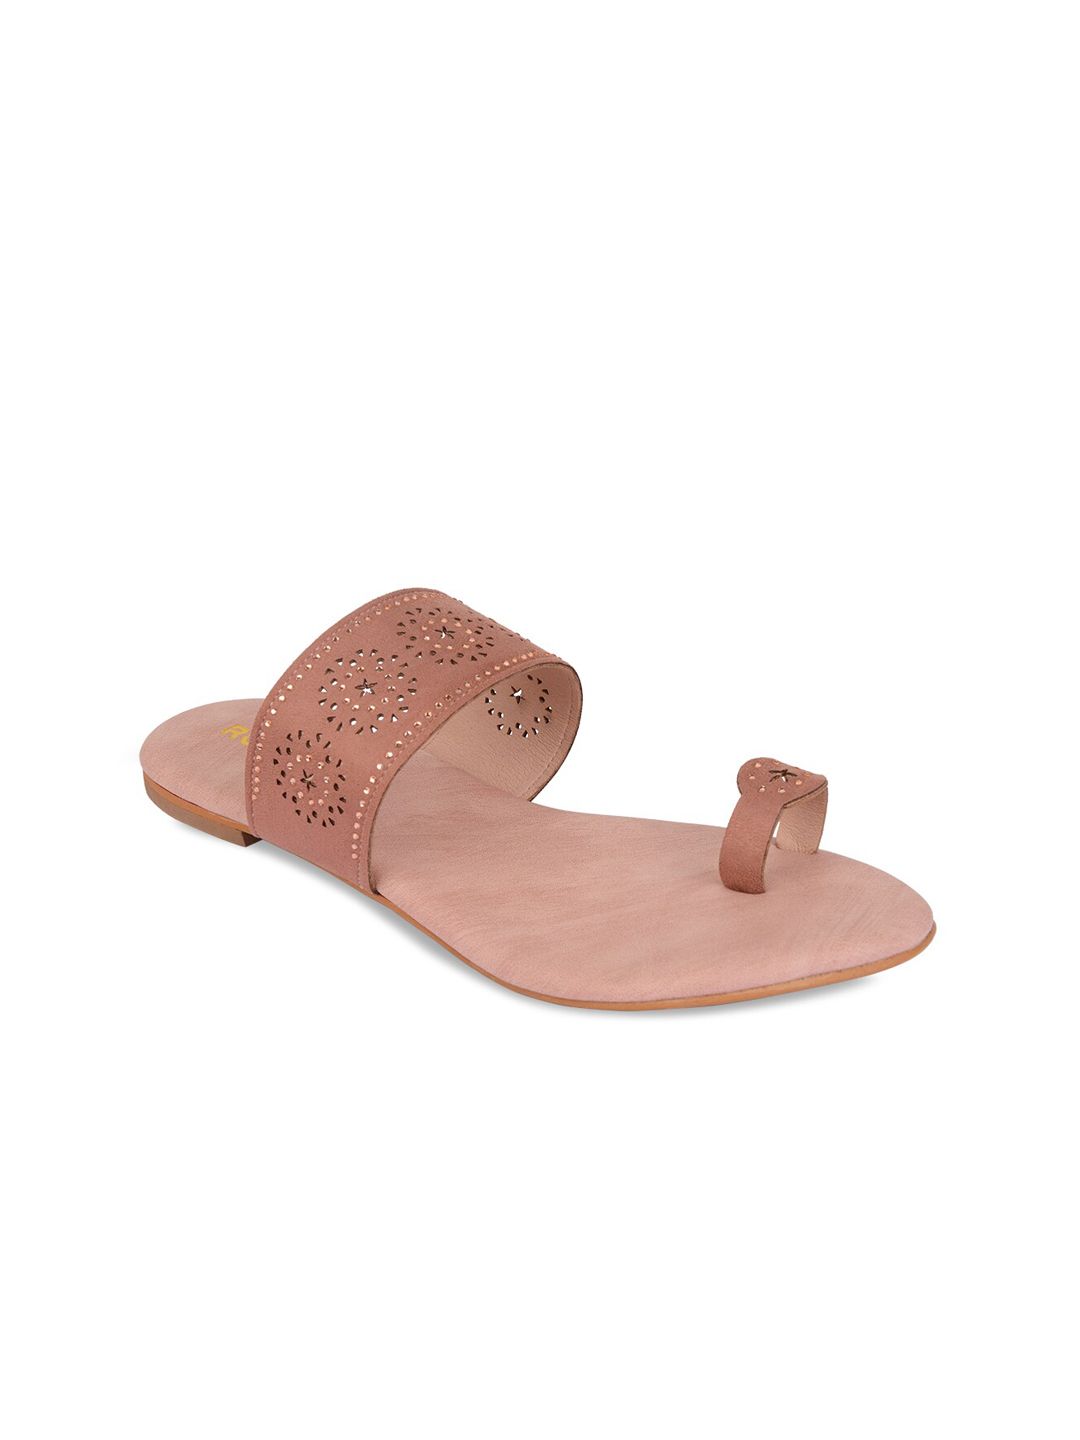 Rocia Women Pink Textured Leather Ethnic One Toe Flats with Laser Cuts Price in India